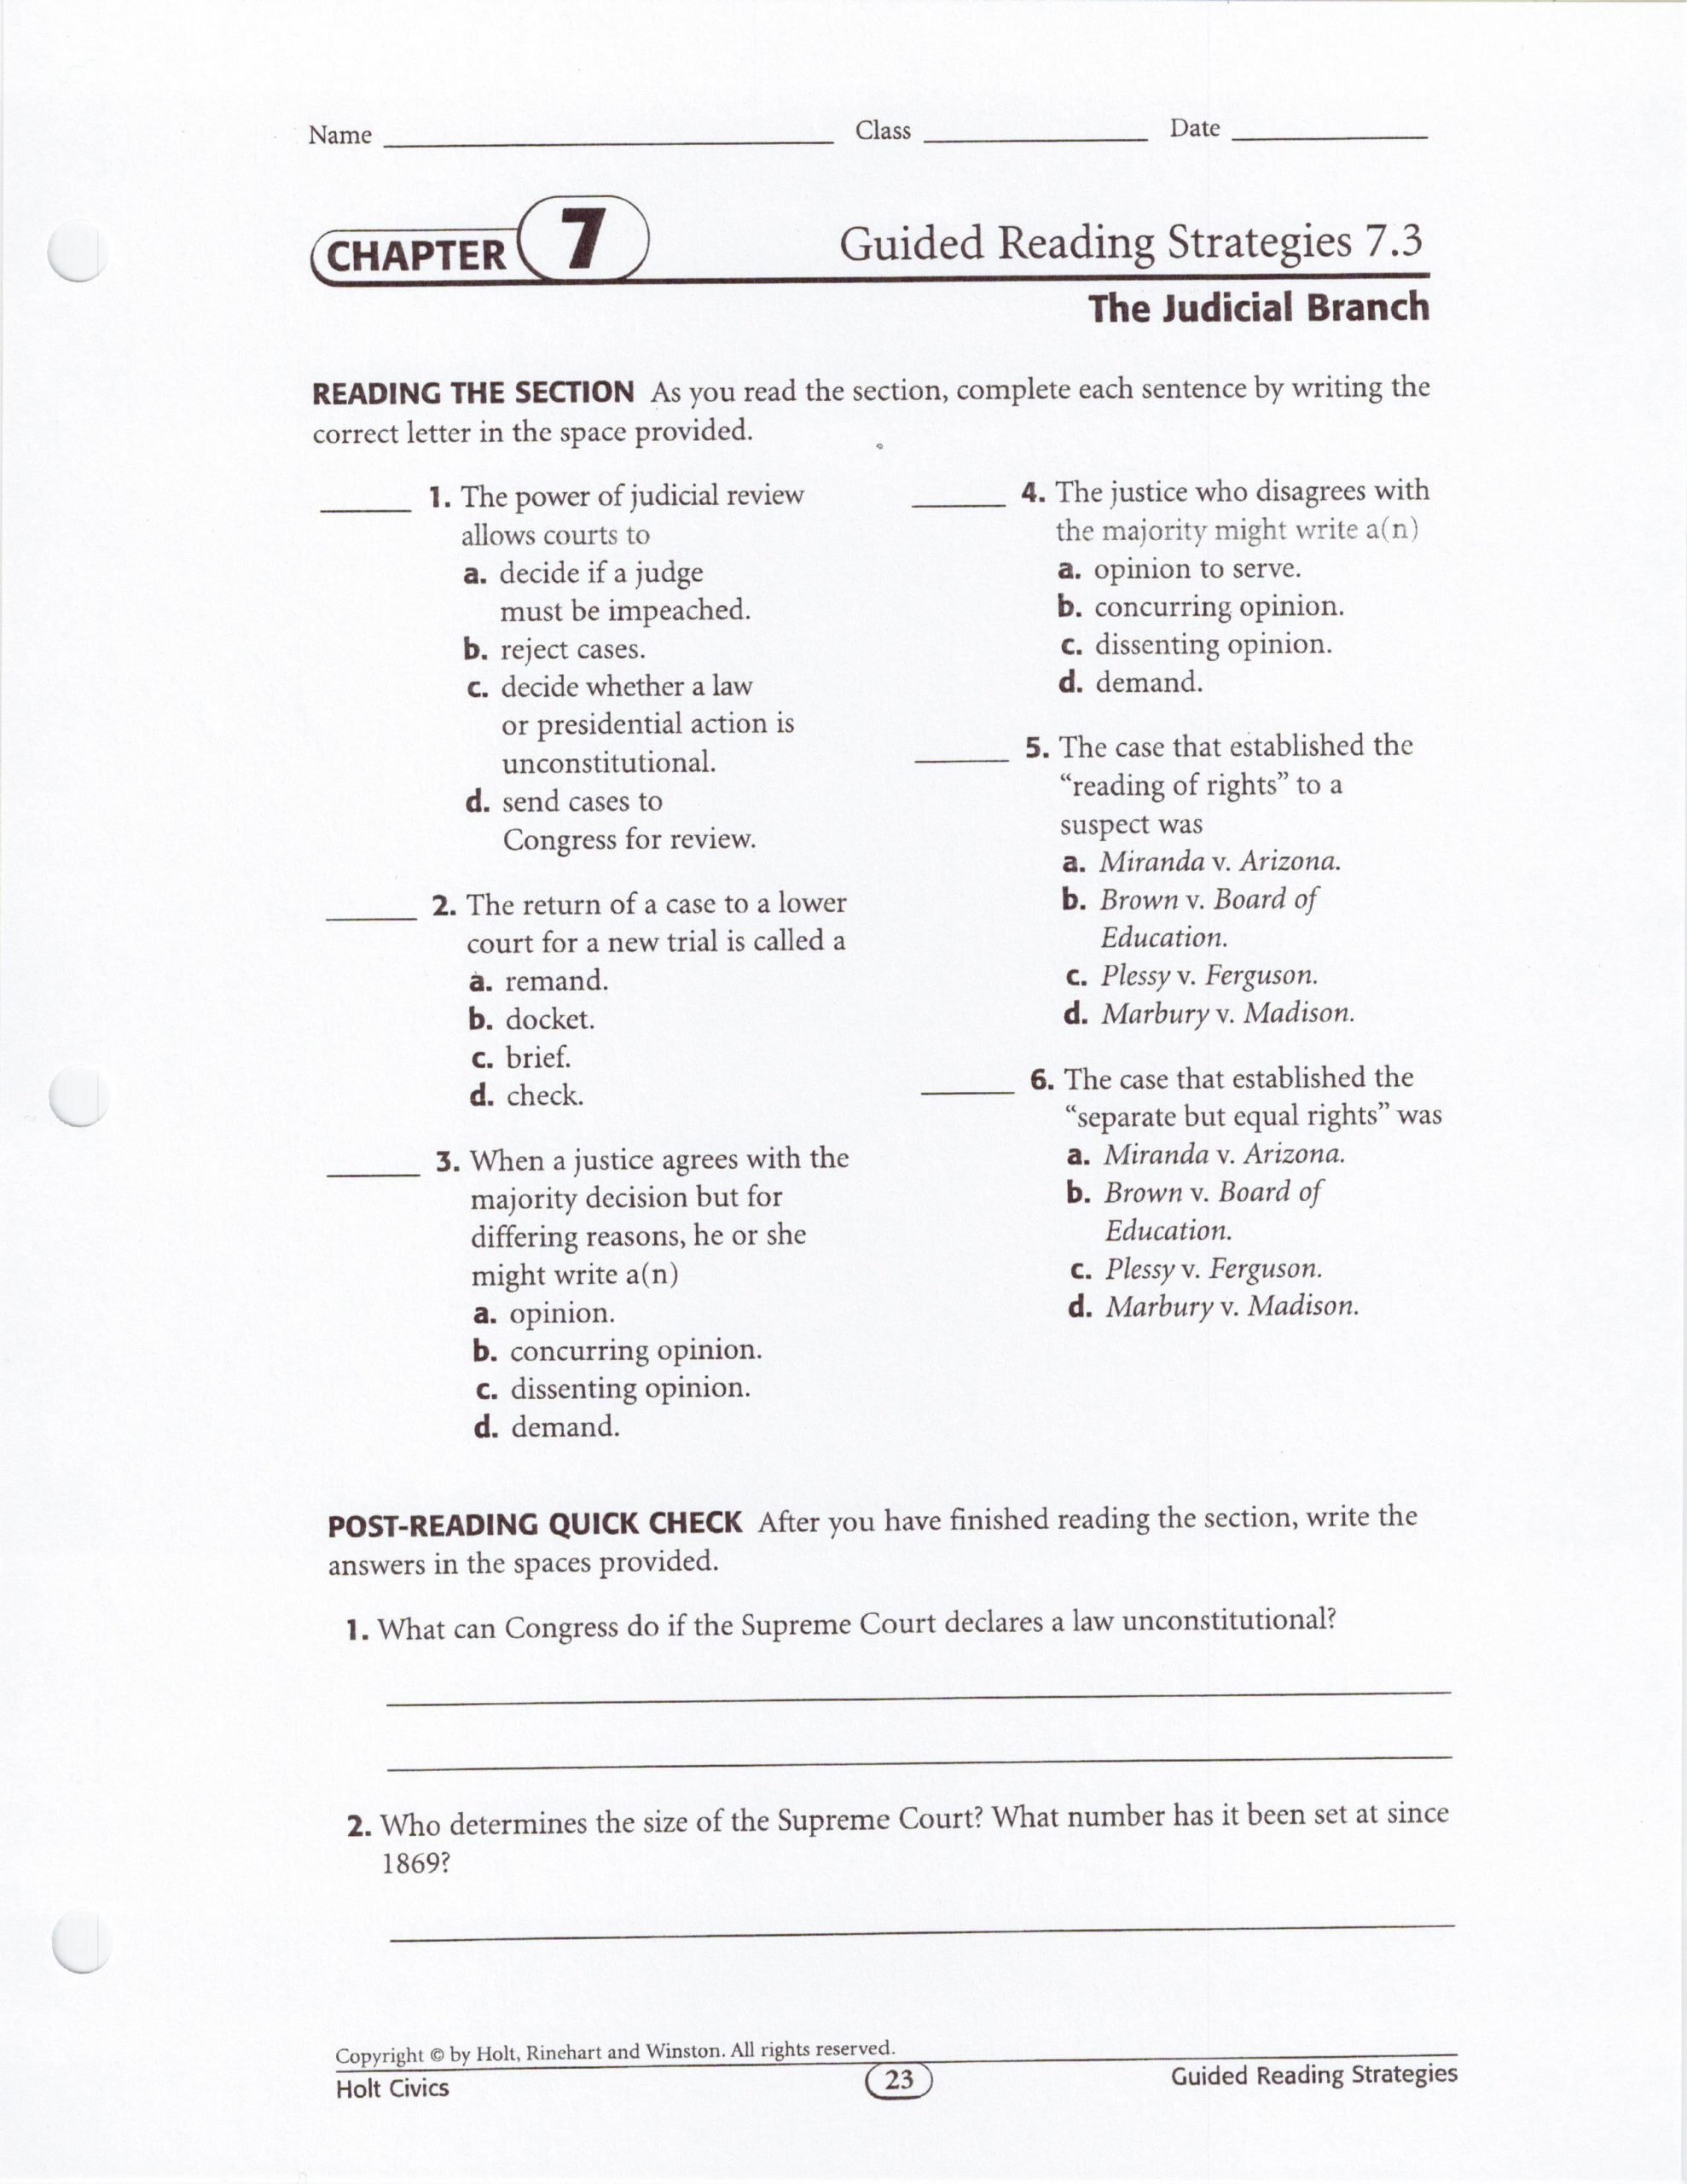 The Electoral Process Worksheet 27 Chapter 7 the Electoral Process Worksheet Answers